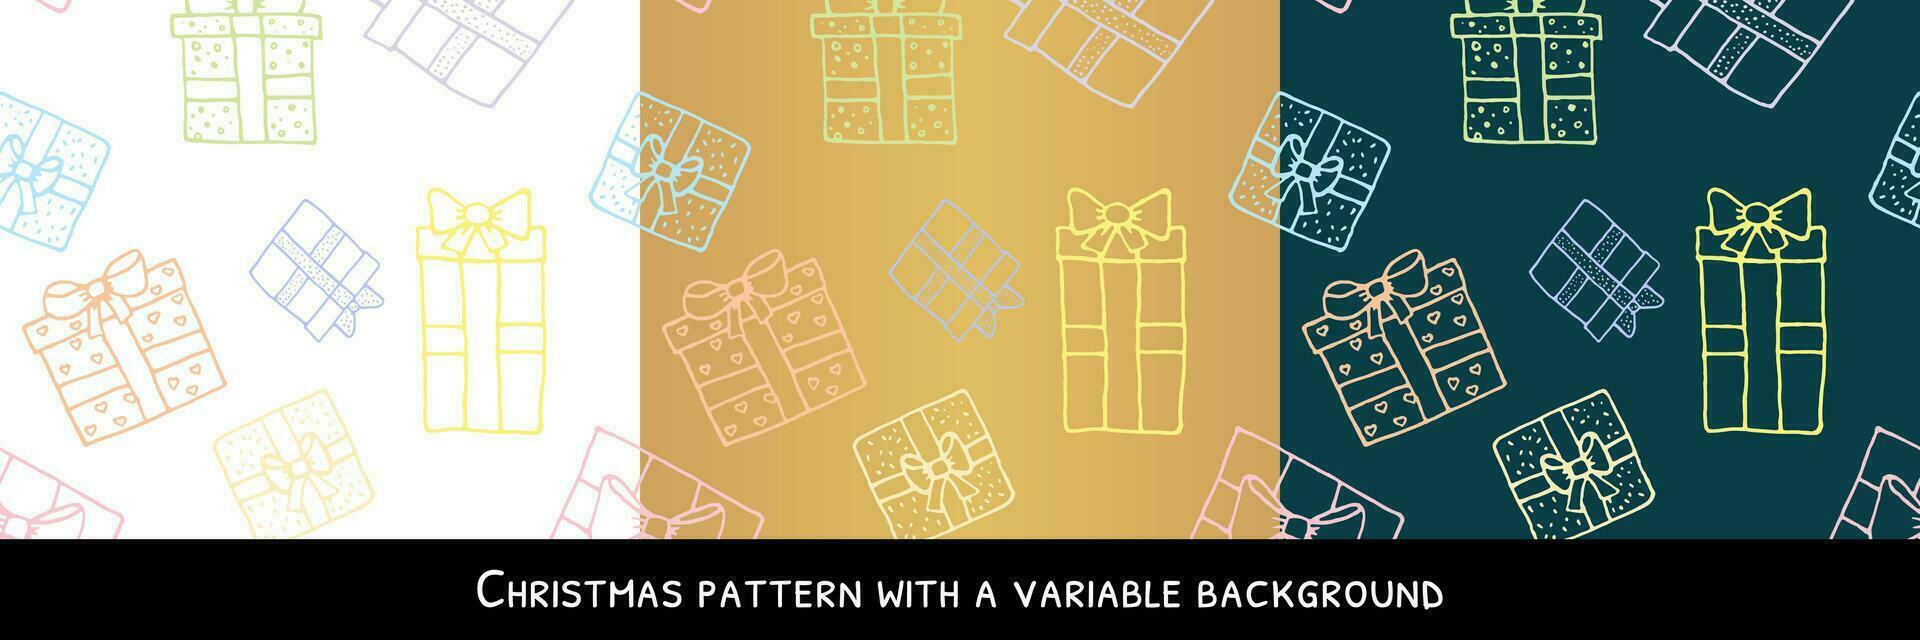 Gift box icon seamless pattern with a variable background. Christmas presents thin line doodle. Gift wrap. Gift package. Stationery, invitations, cards, Hand drawn gifts patterns. Vector